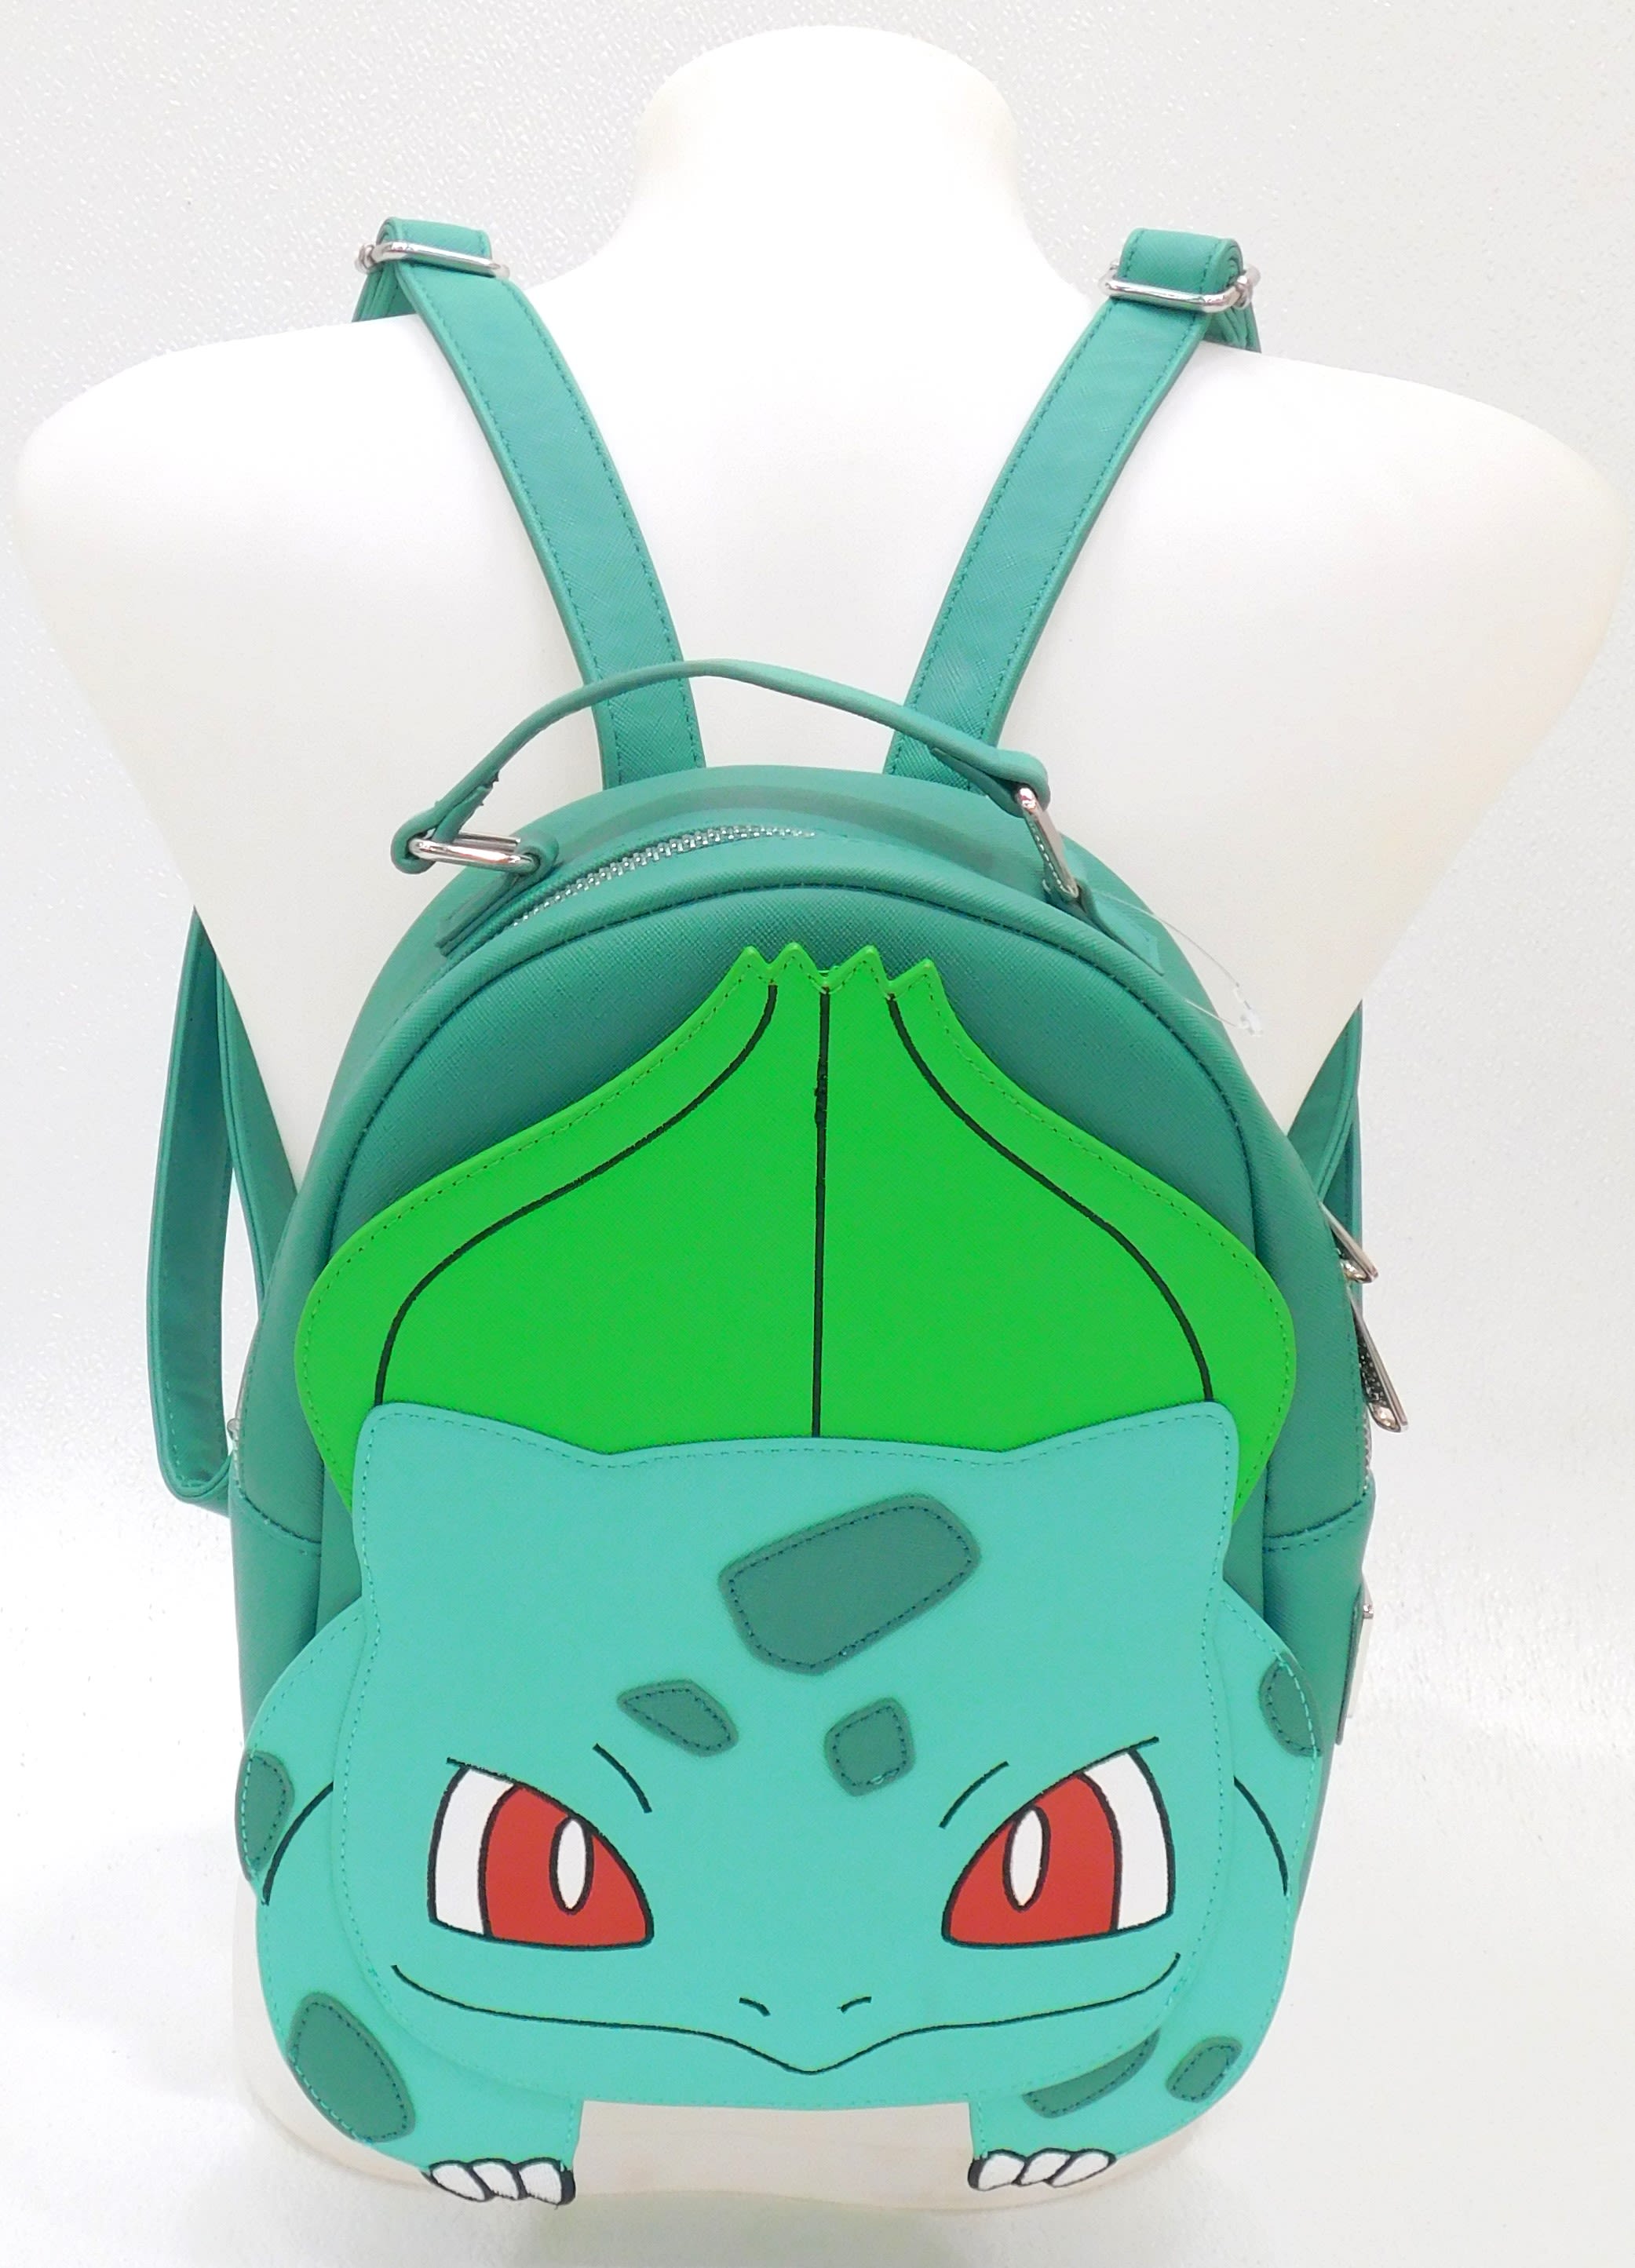 NWT Loungefly Pokemon Bulbasaur Faux Leather Mini Backpack IN HAND  671803313668